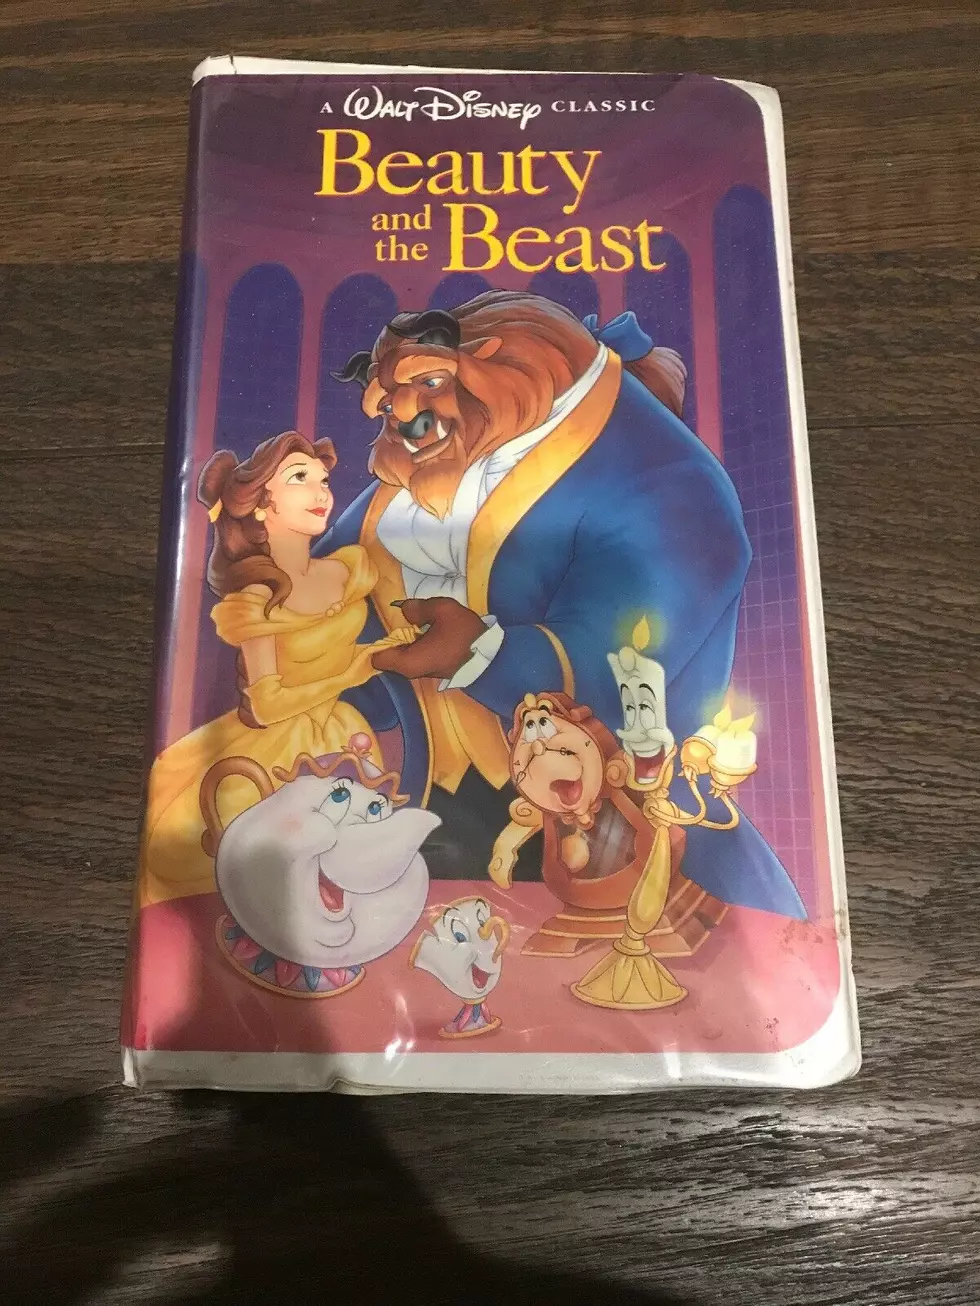 Want To Spend $40K on Disney VHS Tapes?